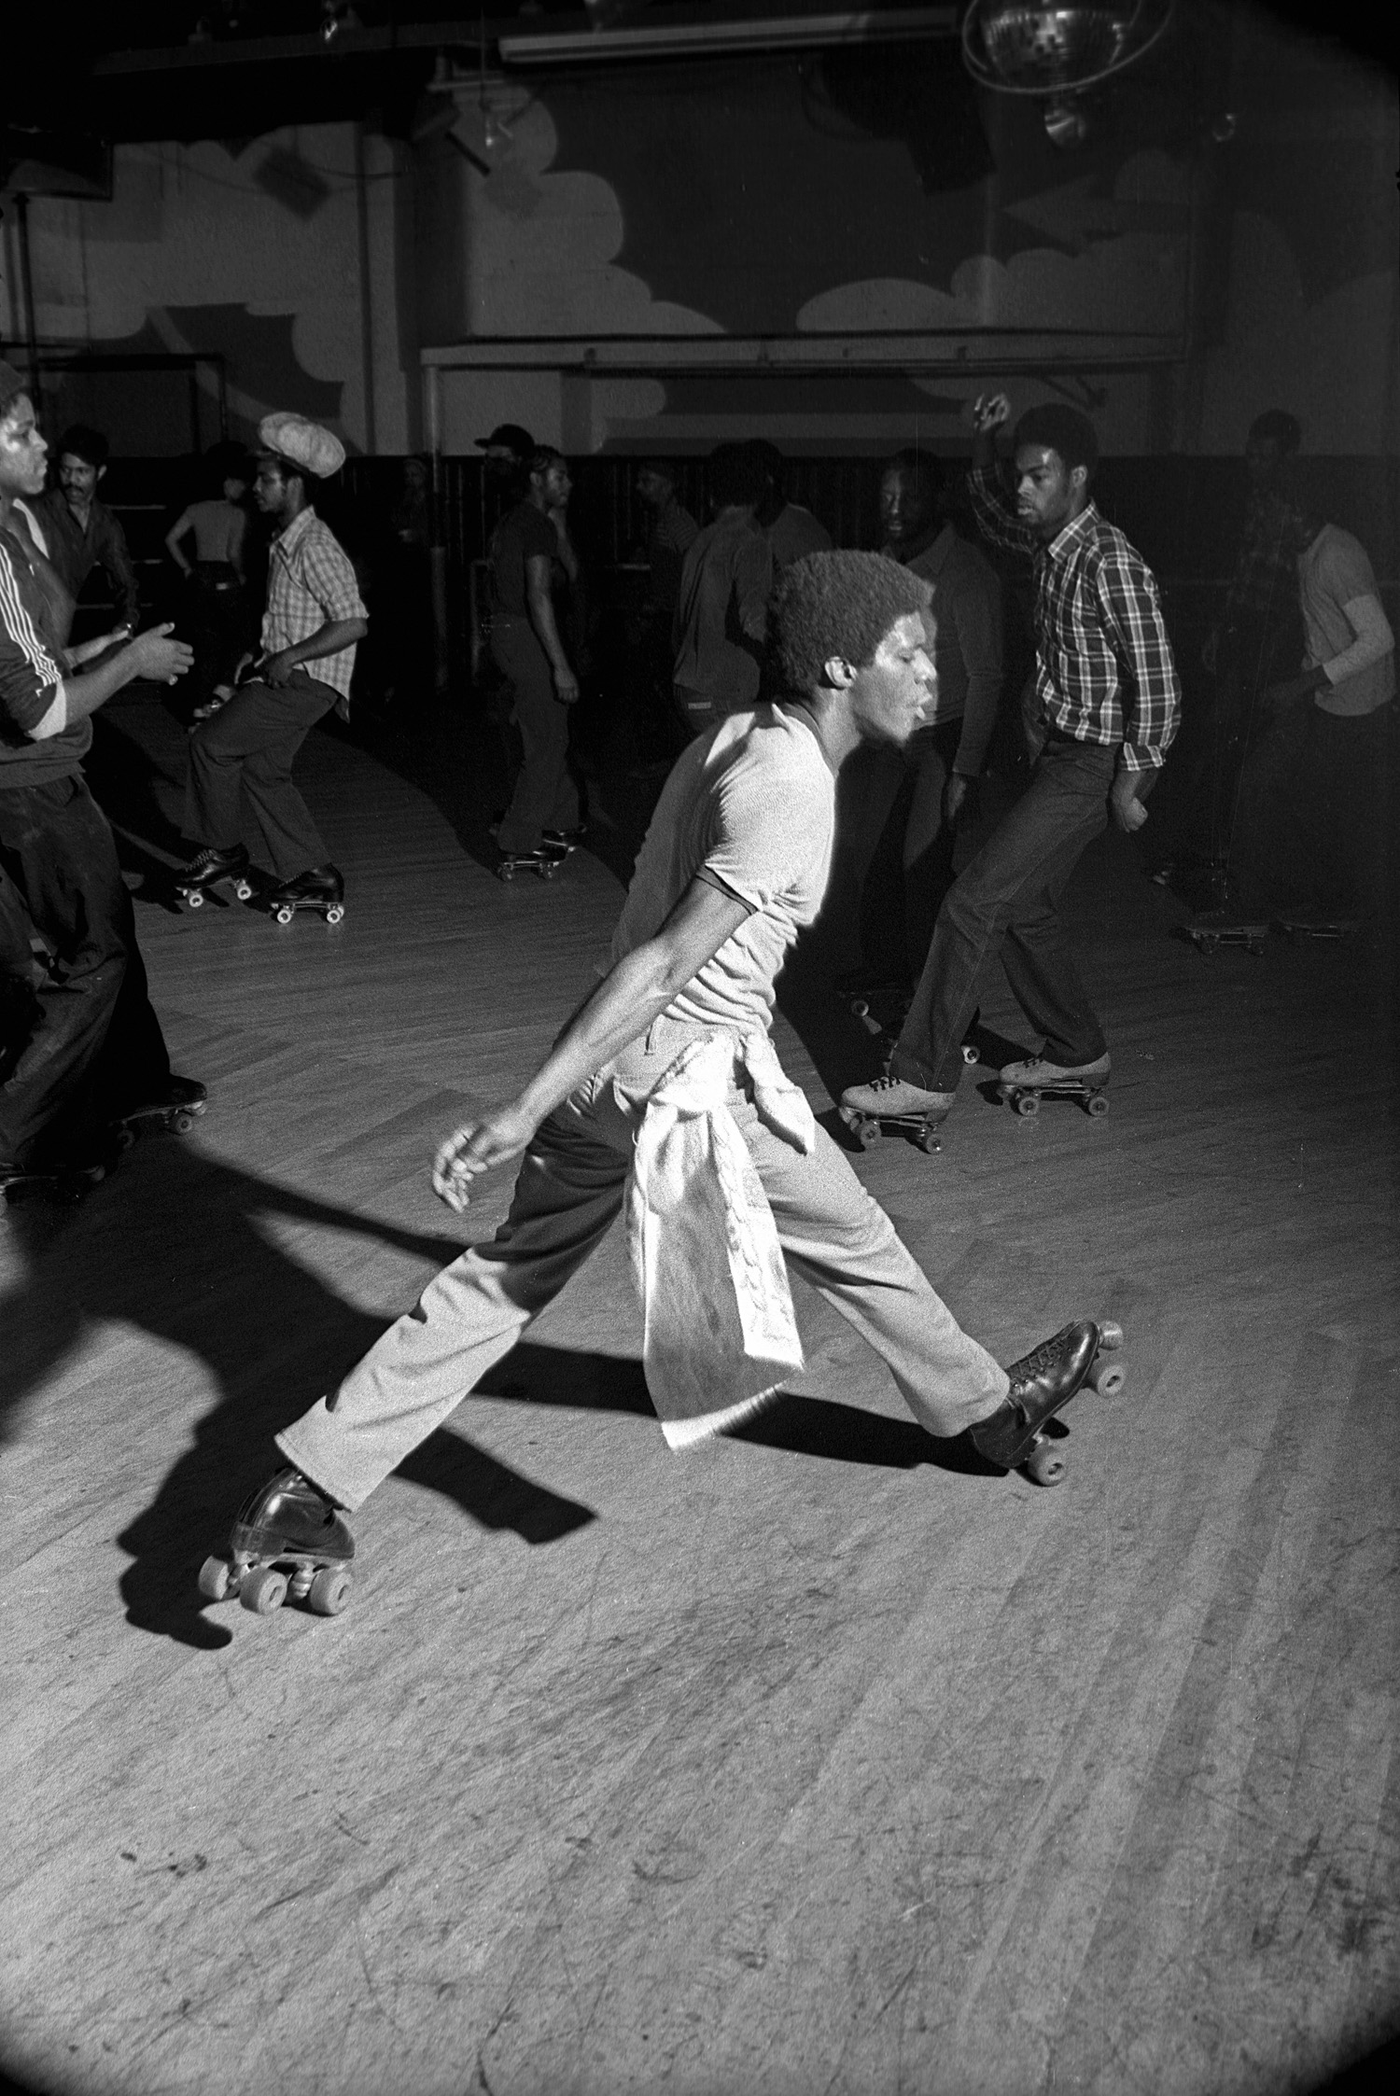 Empire Roller Disco: Photographs by Patrick D. Pagnano}